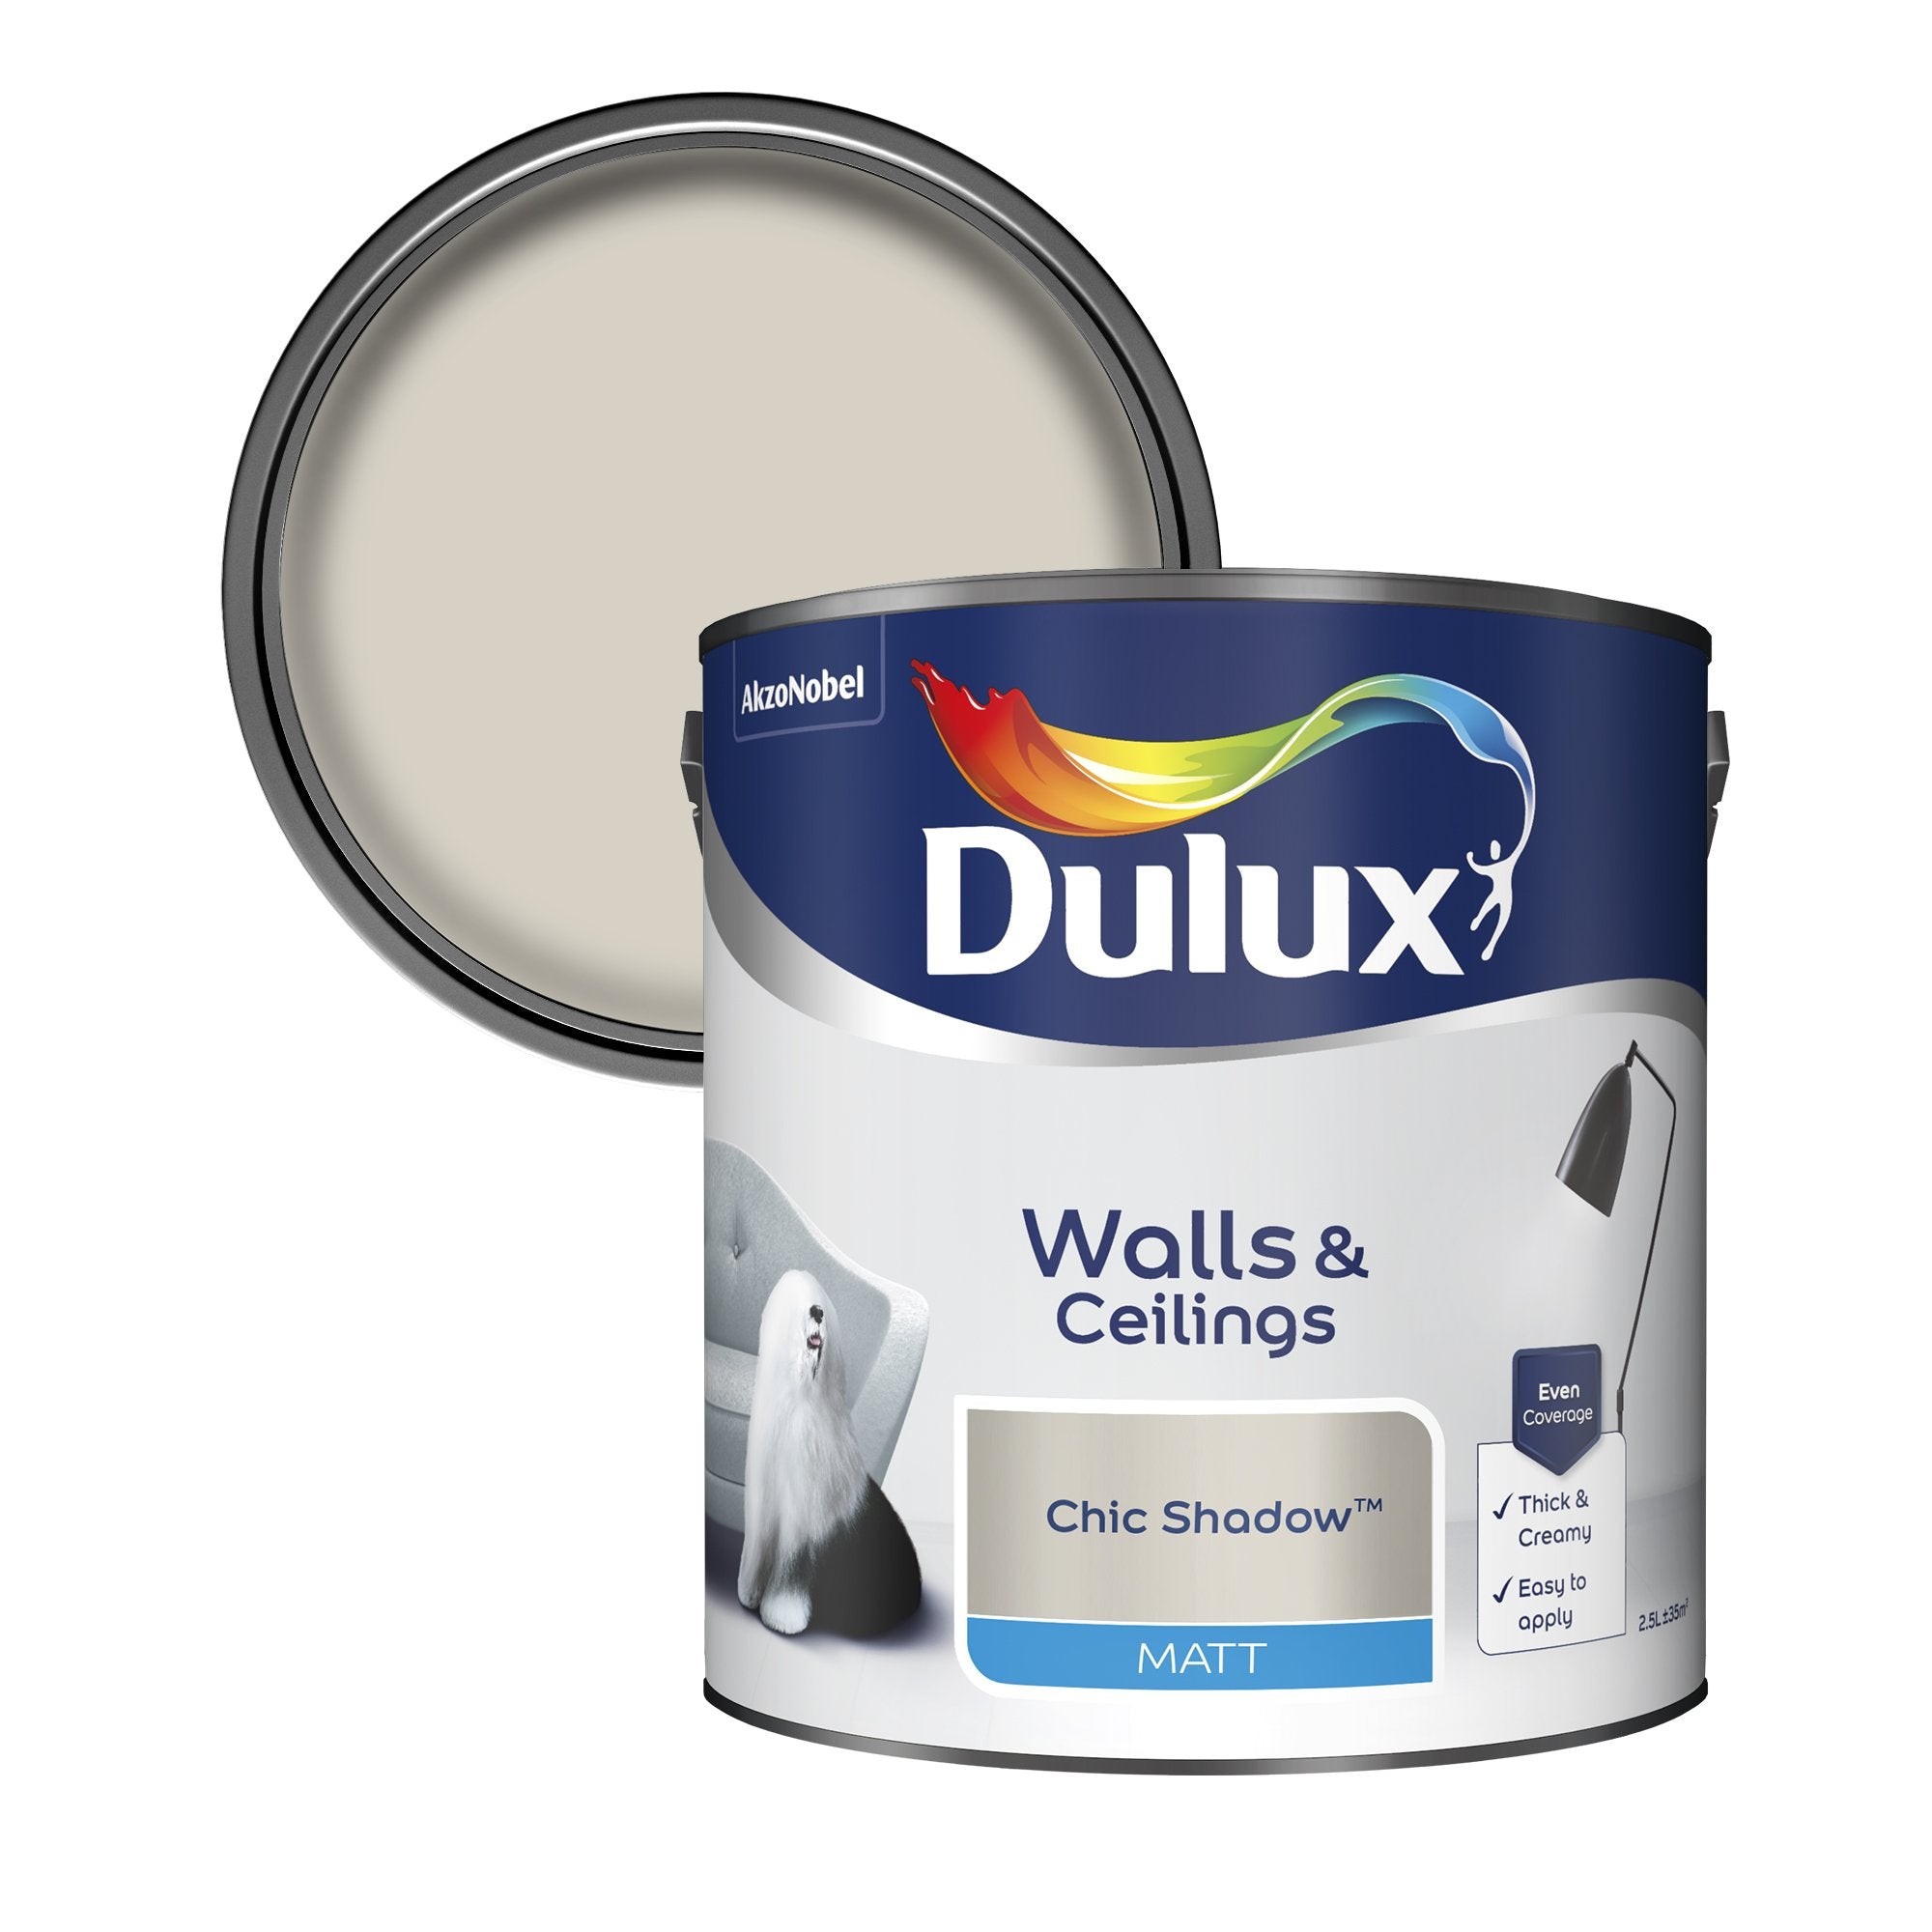 Dulux-Matt-Emulsion-Paint-For-Walls-And-Ceilings-Chic-Shadow-2.5L